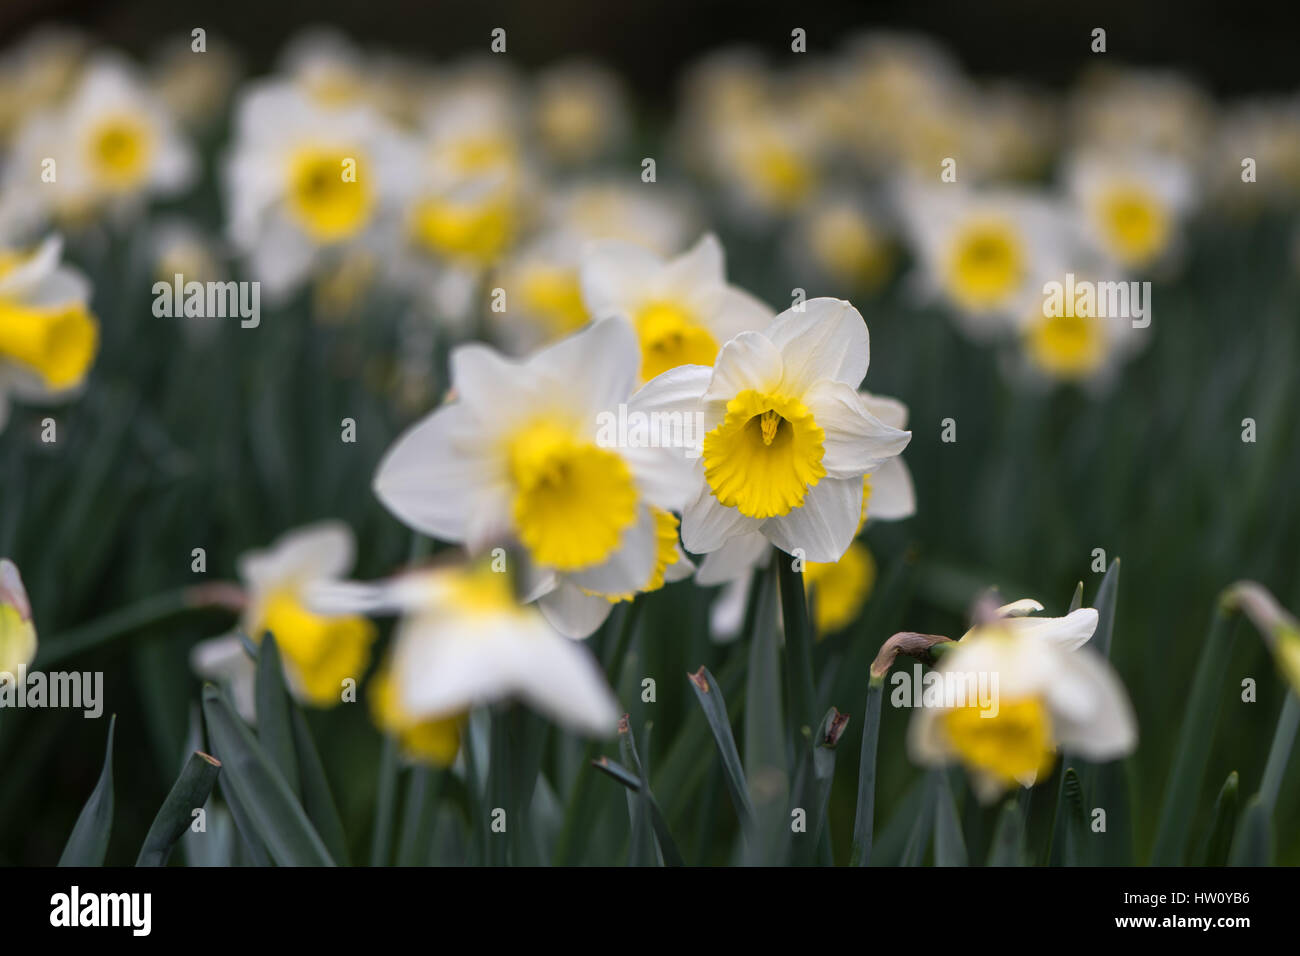 Daffodil Narcissus Holland Sensation flowers. Large-cupped yellow and white flower of spring perennial plant in the Amaryllidaceae (amaryllis) family Stock Photo